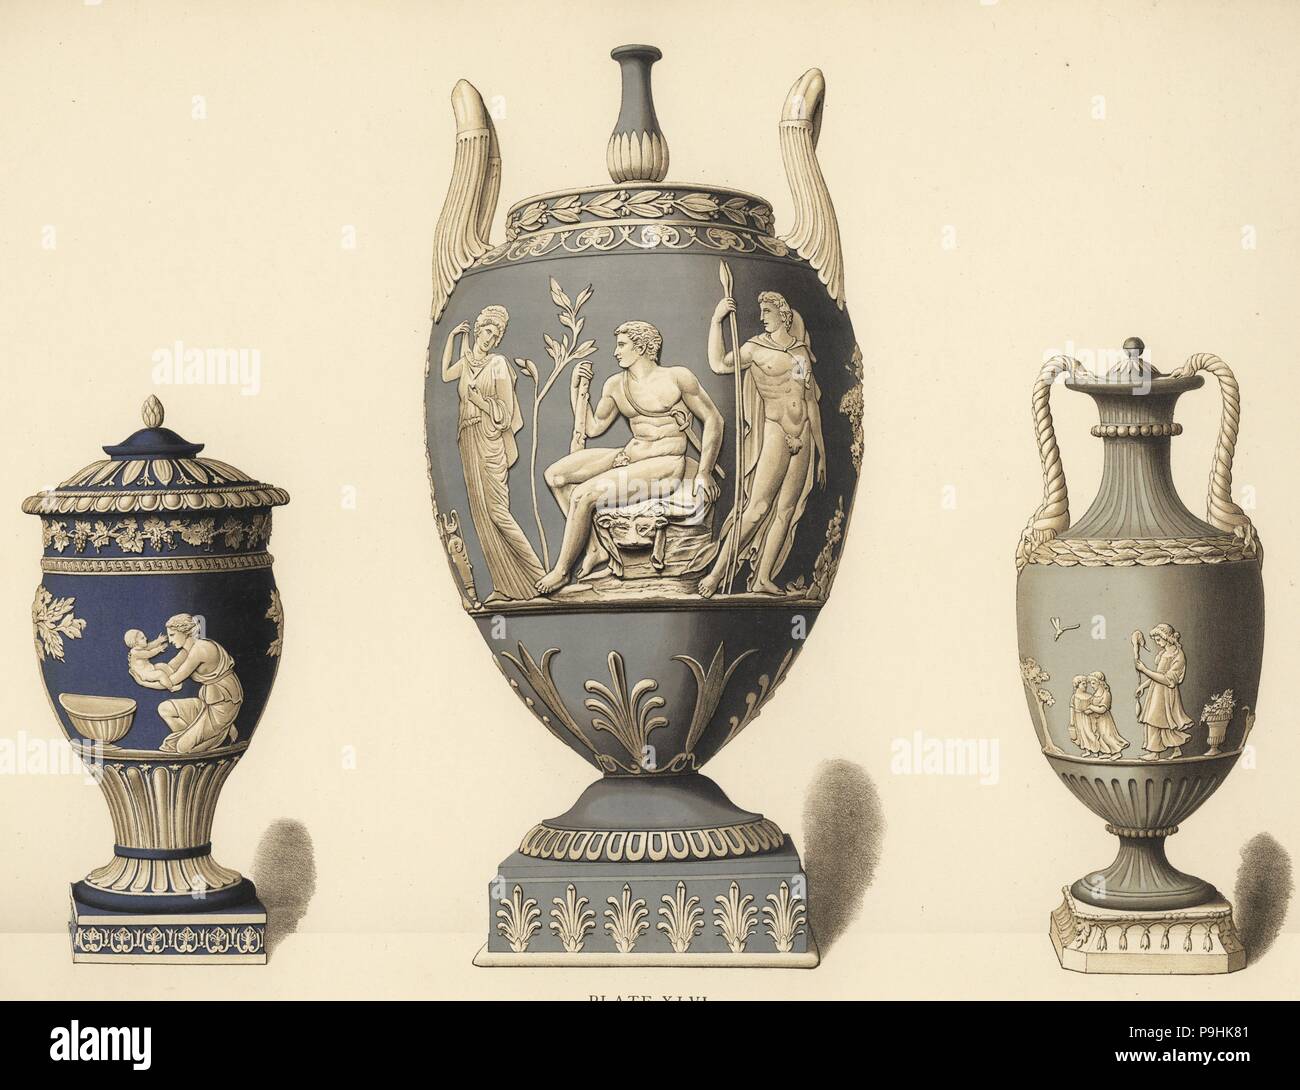 Vase with reliefs of Achilles (L), vase with Hercules in the garden of the  Hesperides (C), and vase with reliefs designed by Lady Templeton (R).  Chromolithograph by W. Griggs from Frederick Rathbone's